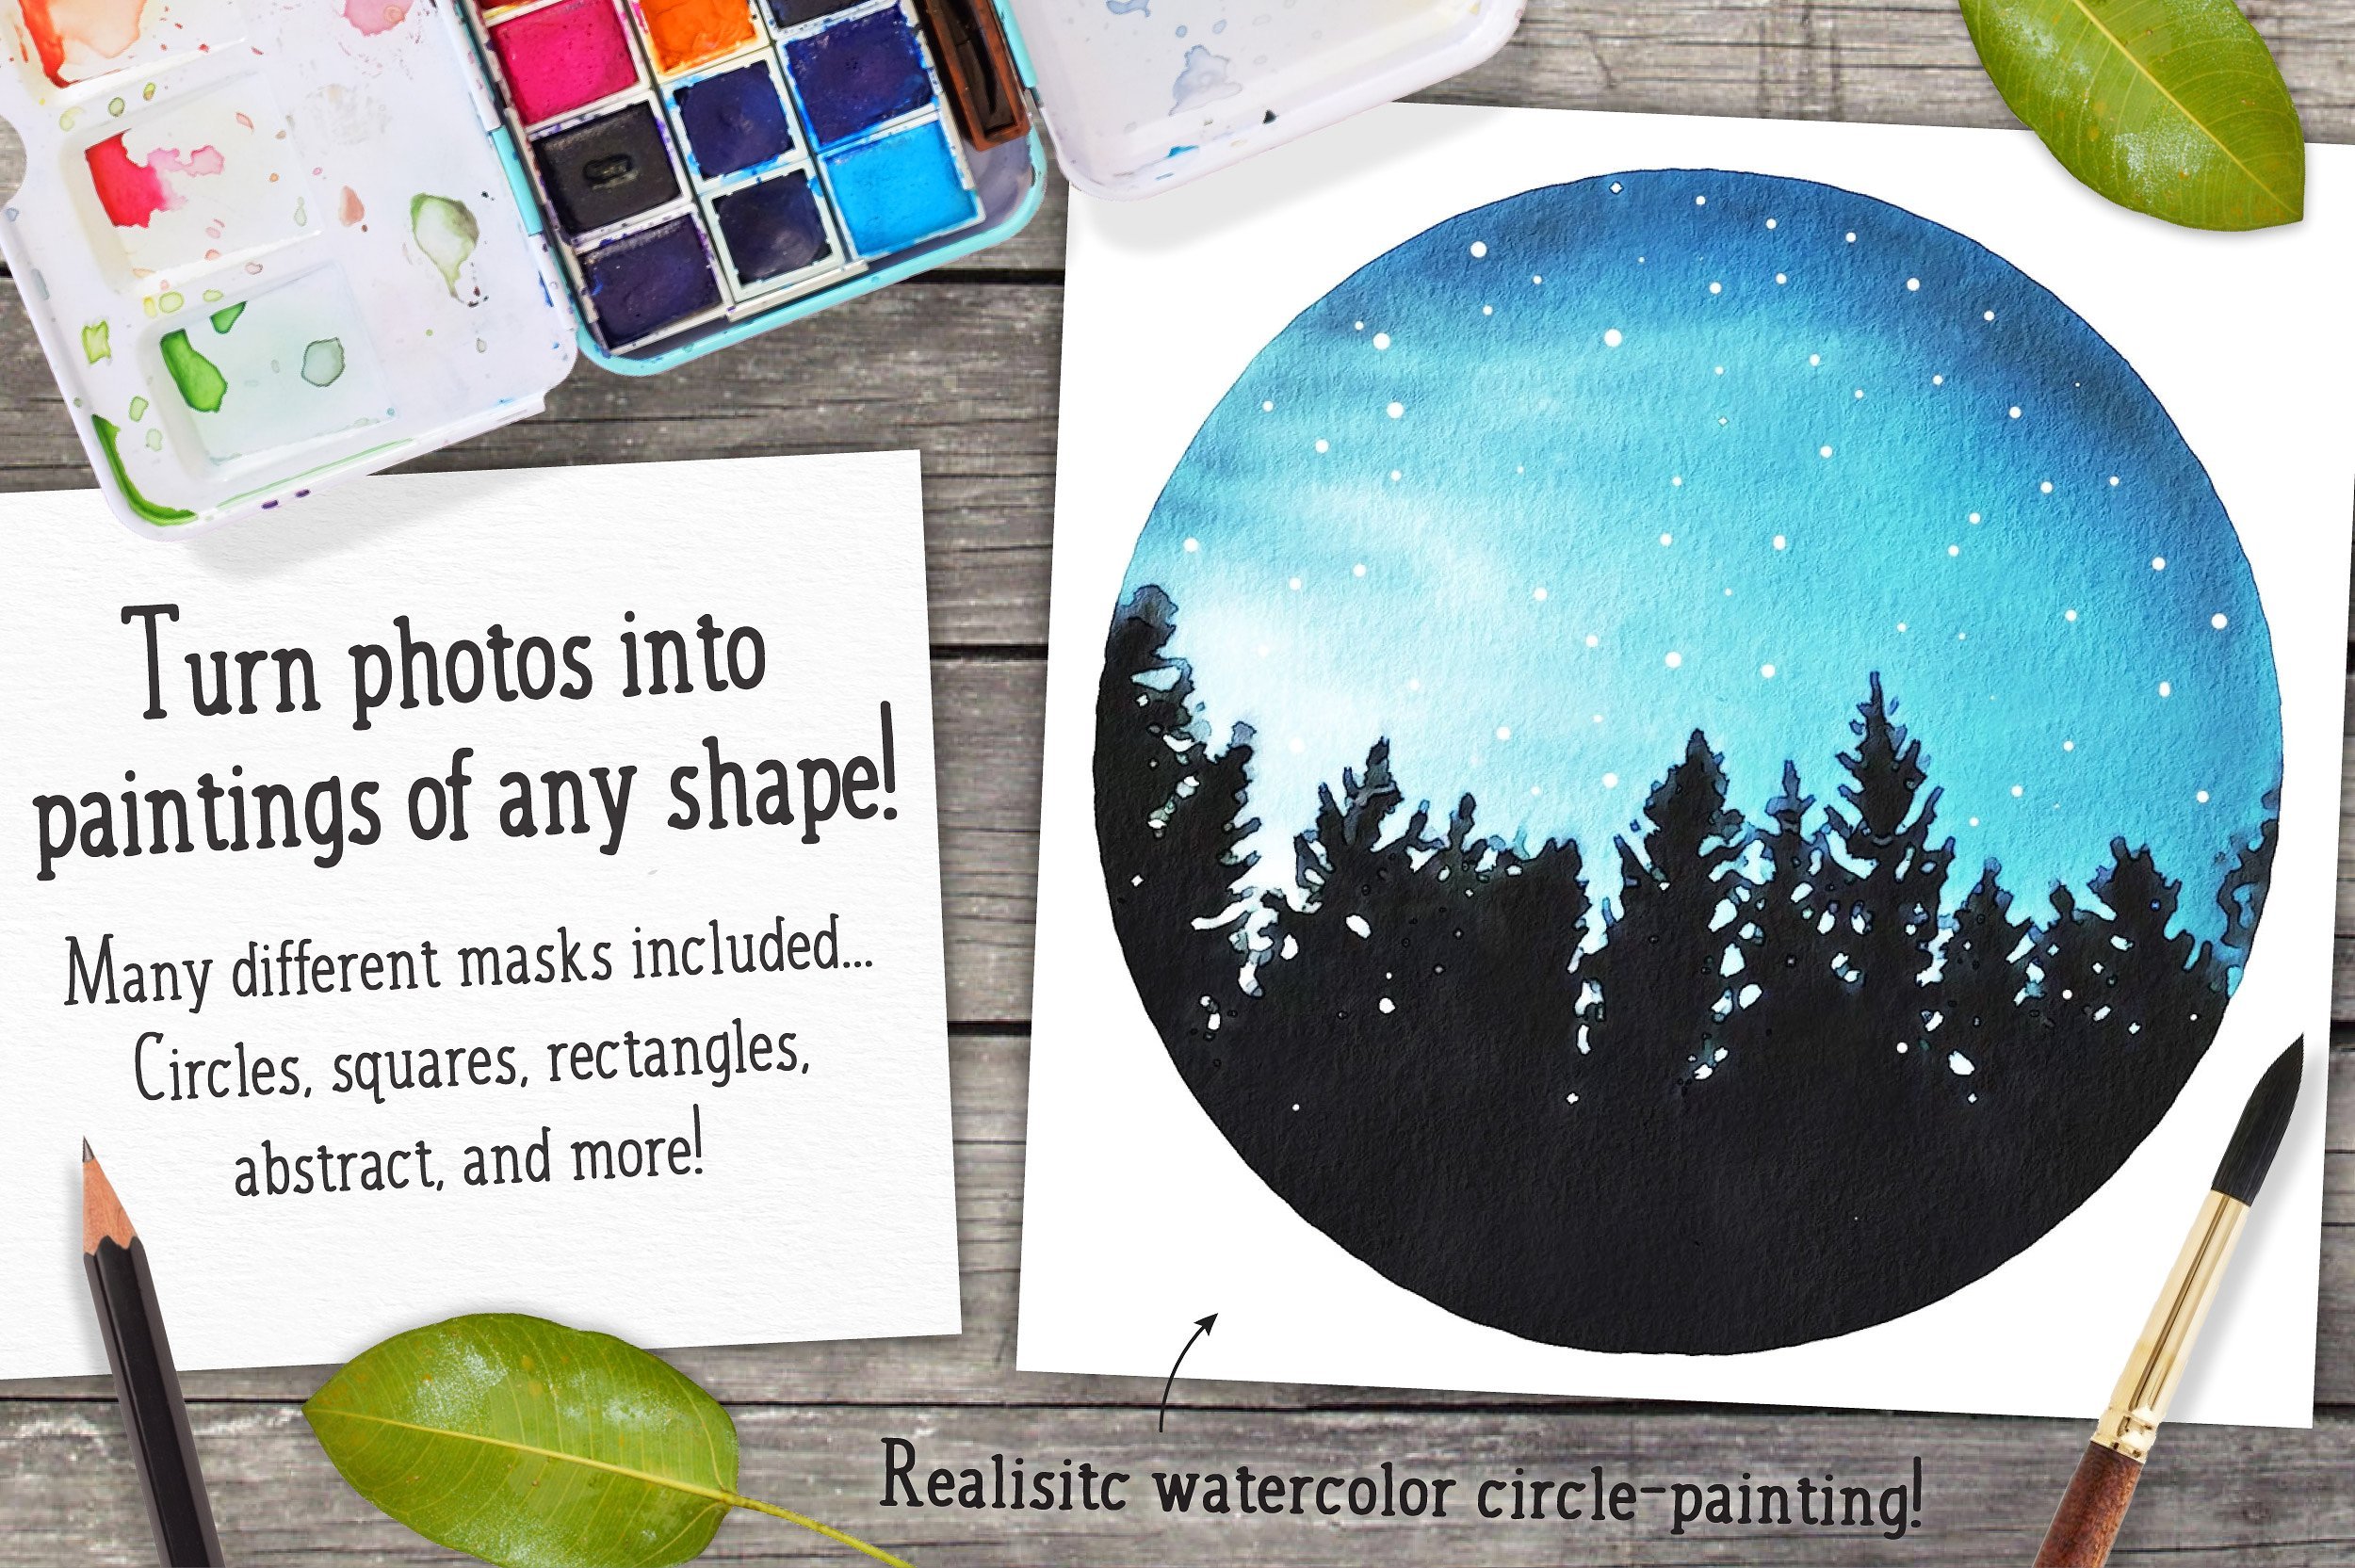 Watercolor Photo Effect Pro For Photoshop